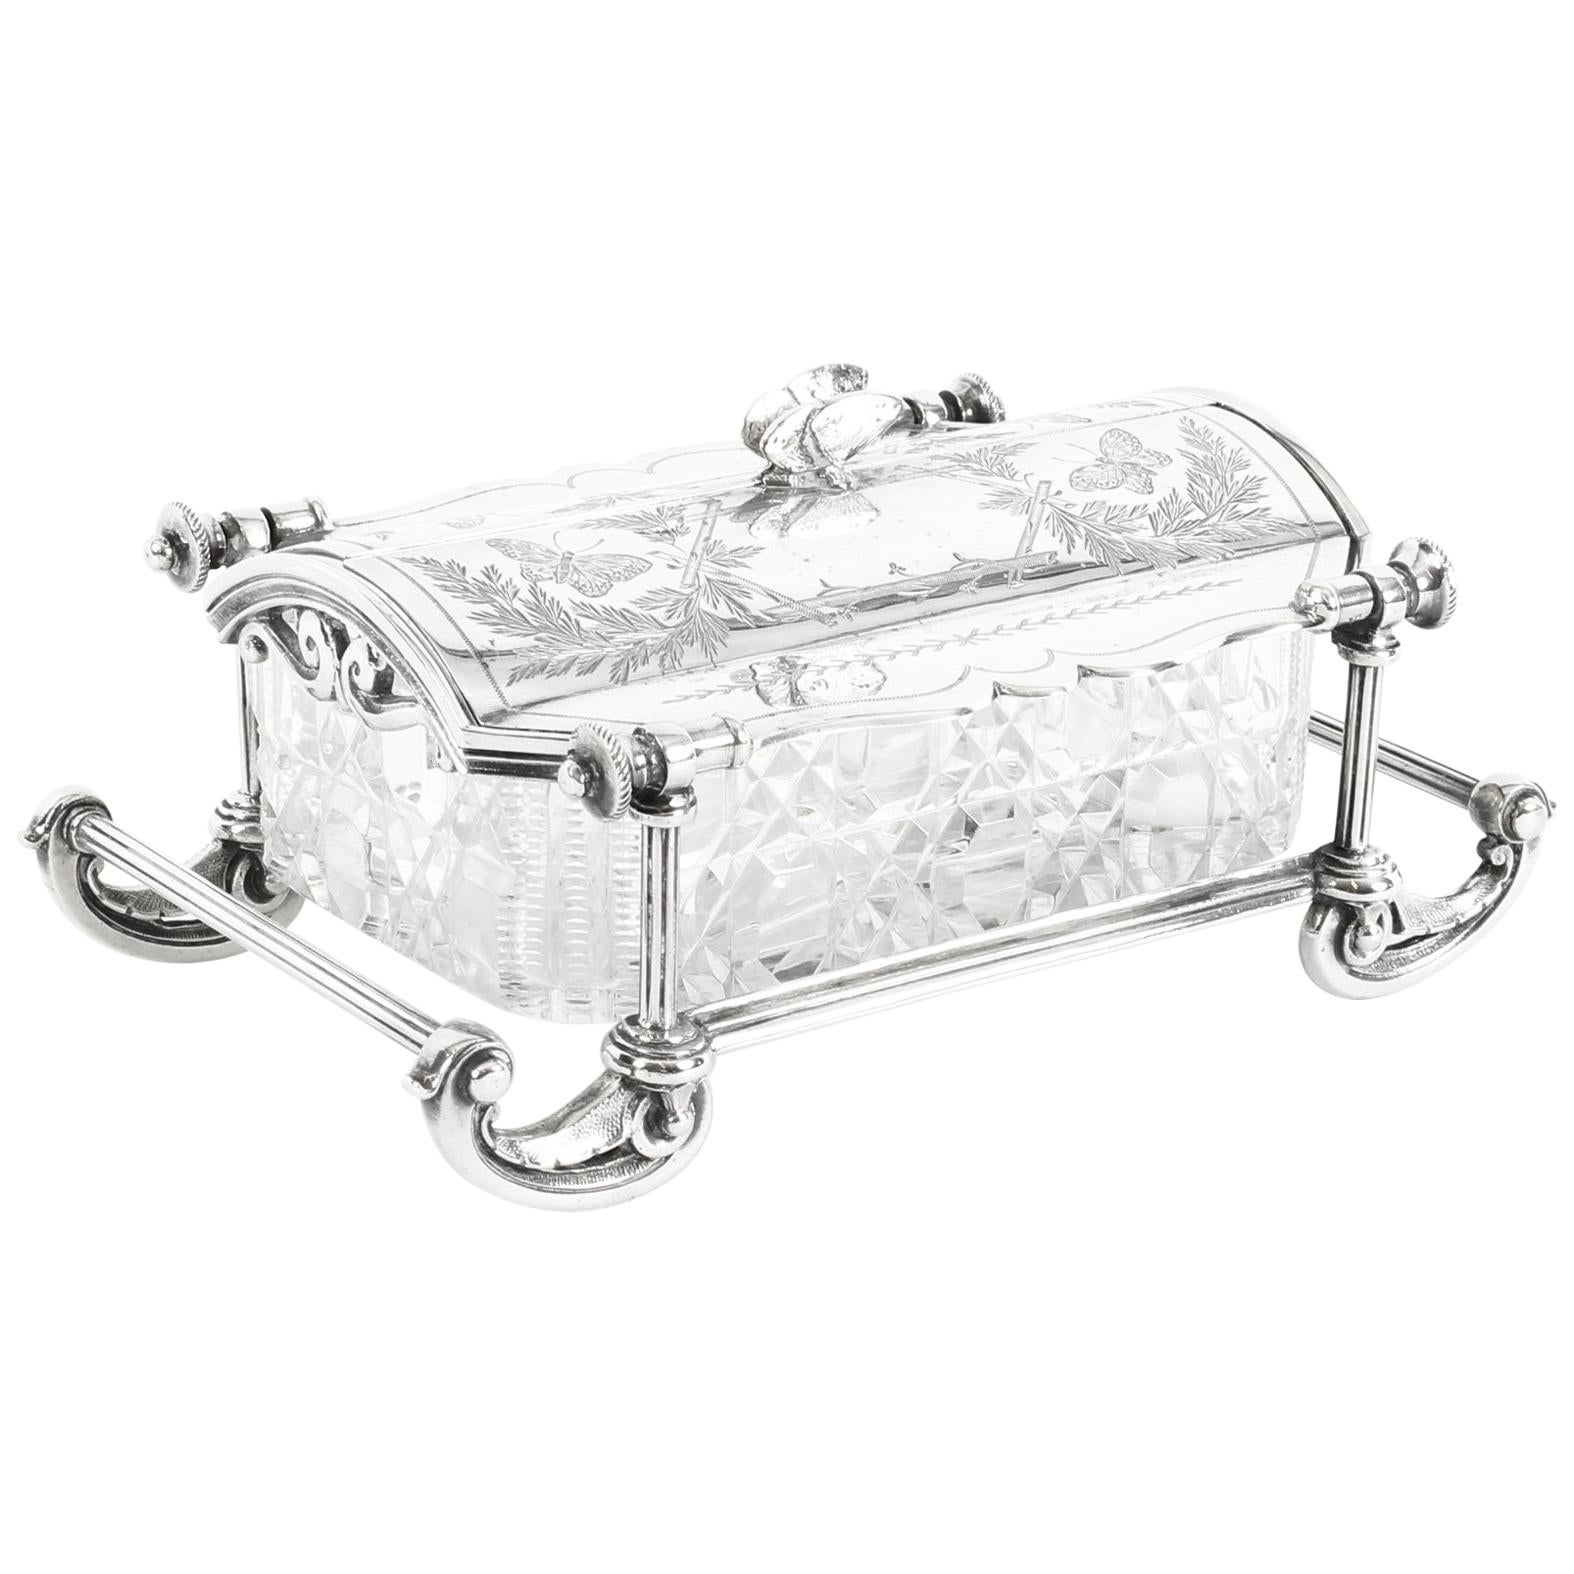 Elkington & Co English Silver Plated and Cut Glass Butter Dish, 19th Century